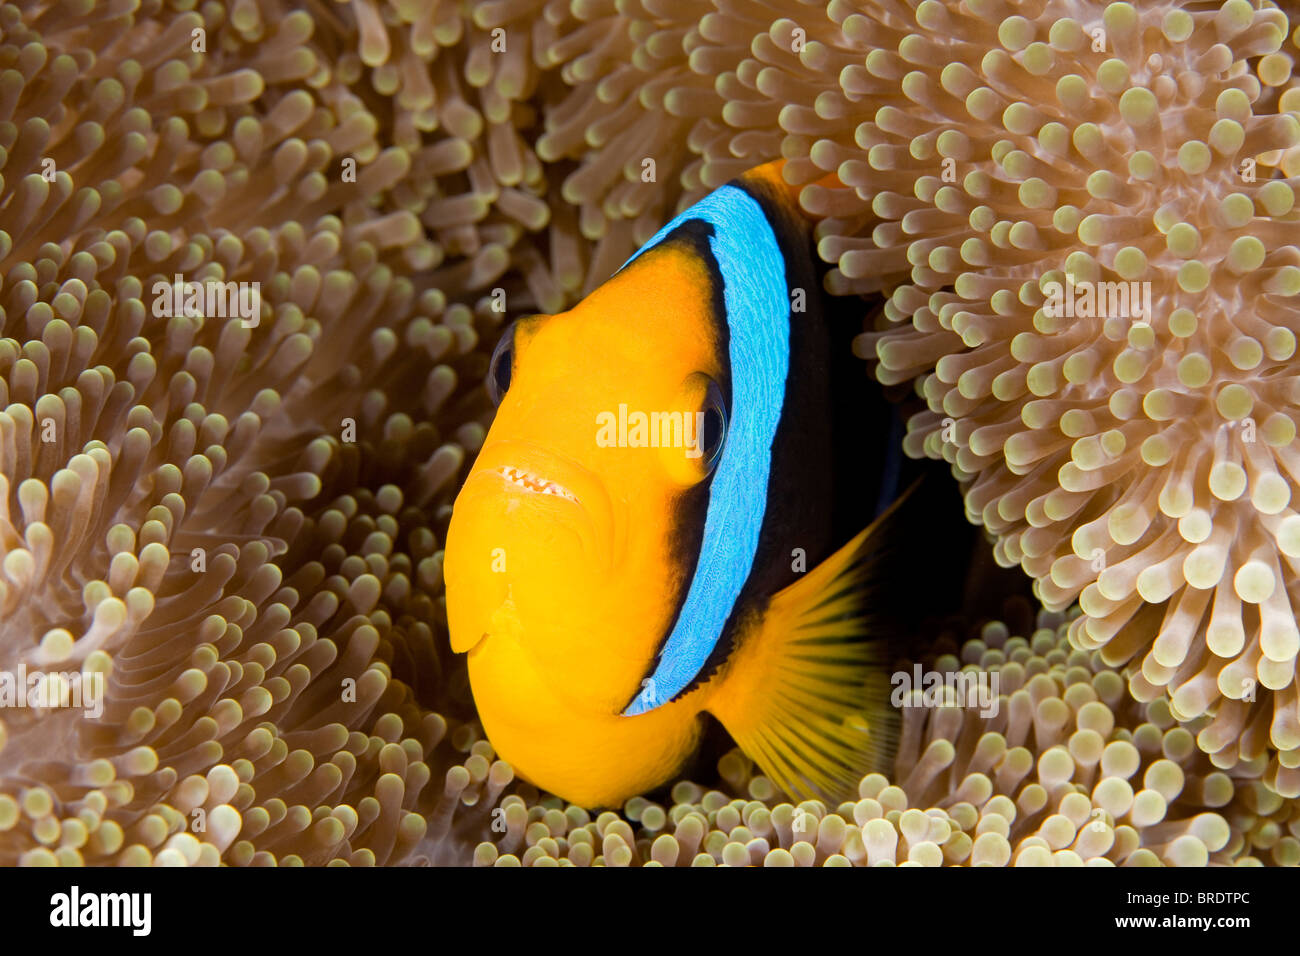 An orange fin clownfish sheltering among the tentacles of its anemone. This fish has its mouth open displaying the teeth. Stock Photo